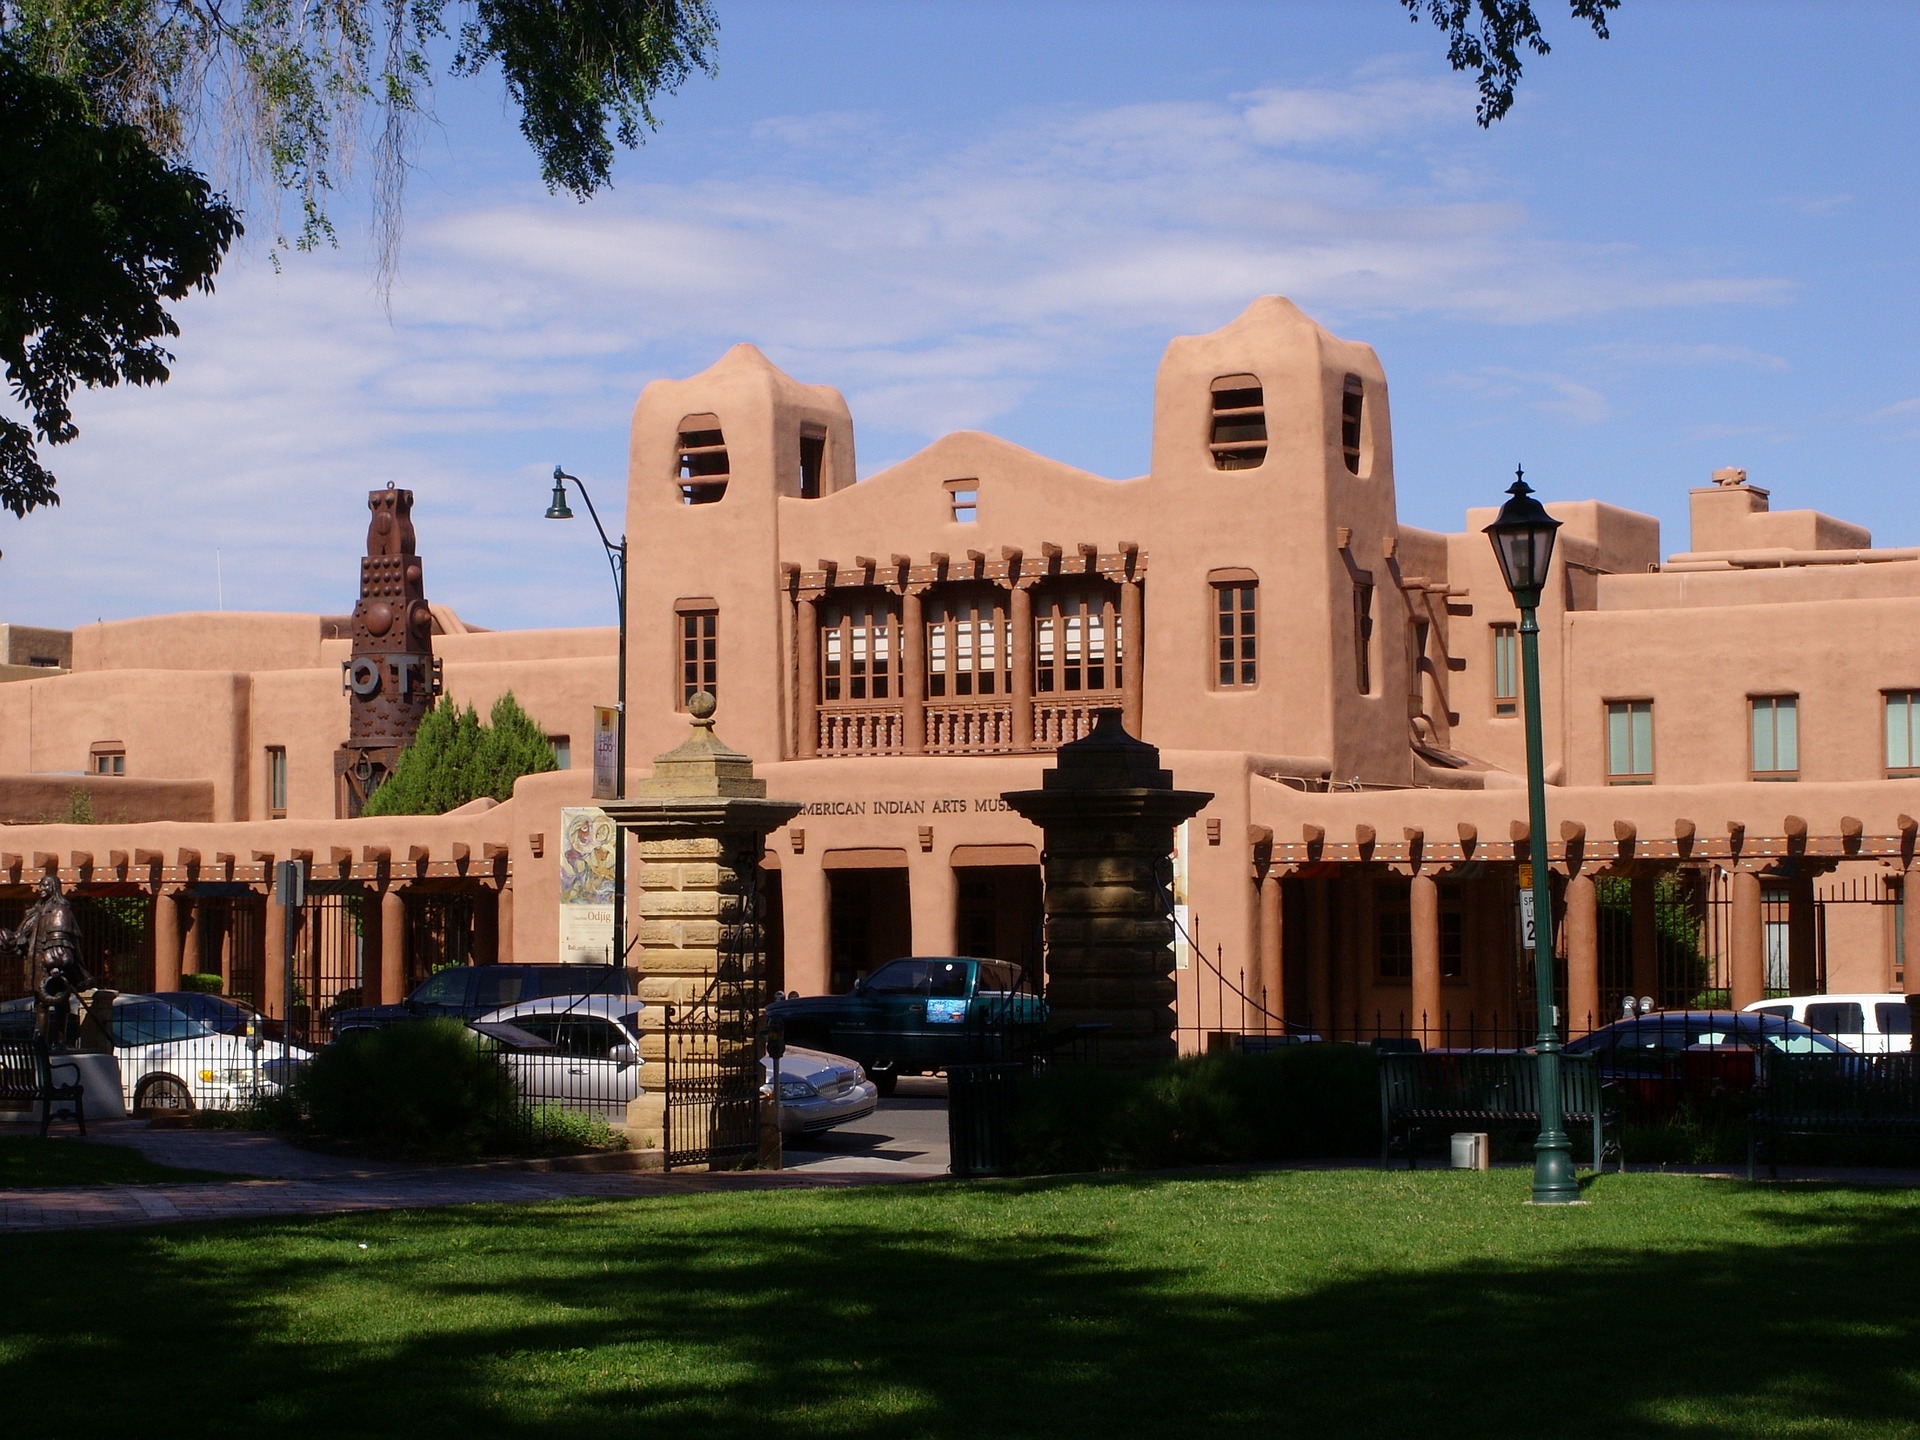 a historic landmark building in new mexico with a park in the foreground